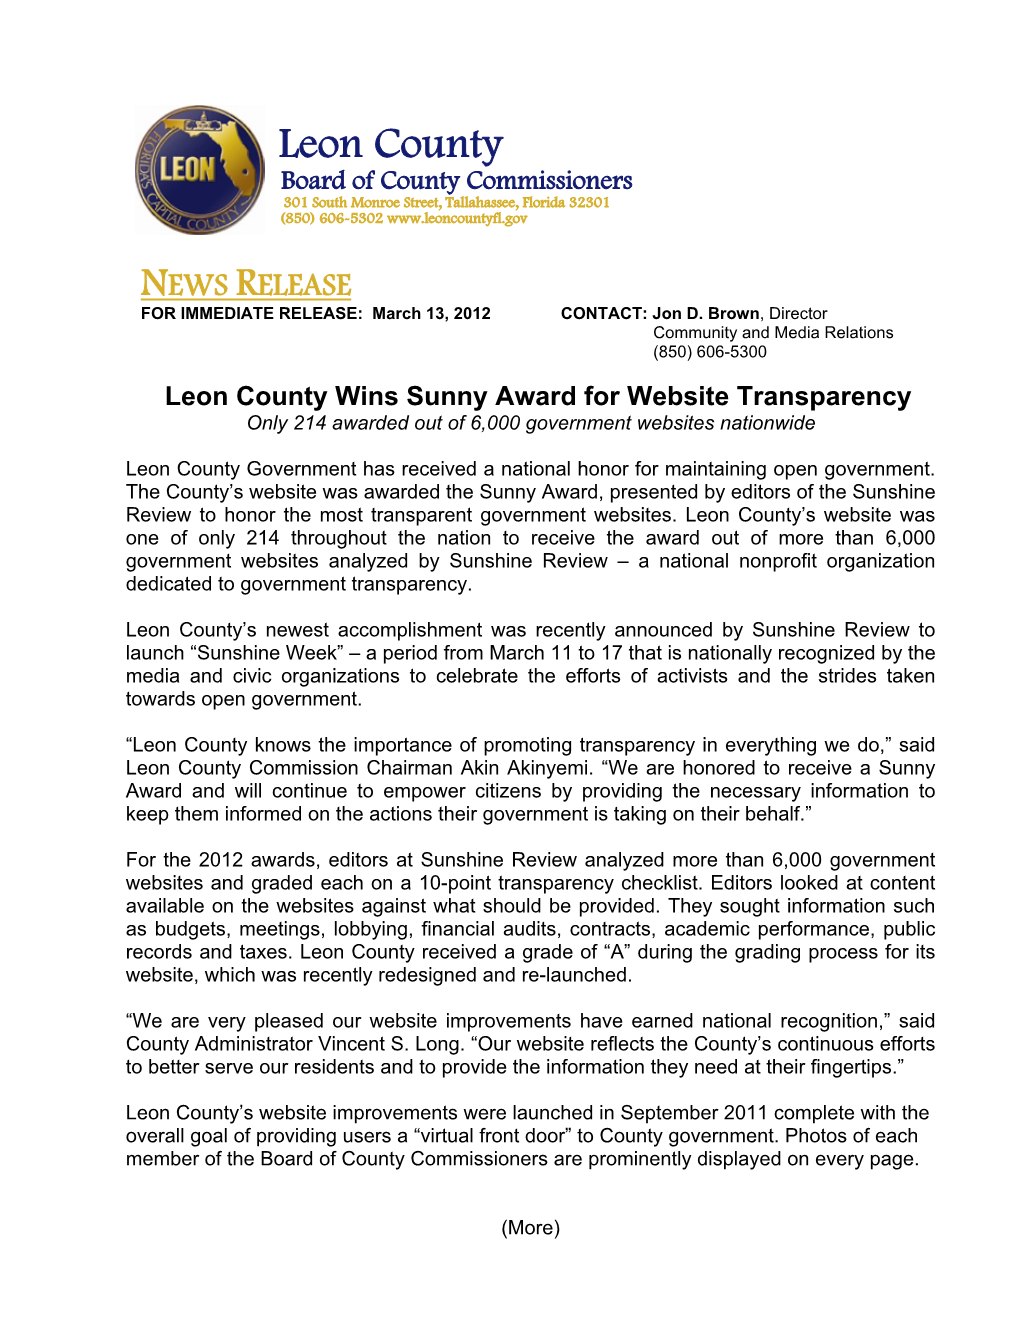 Leon County Wins Sunny Award for Website Transparency Only 214 Awarded out of 6,000 Government Websites Nationwide